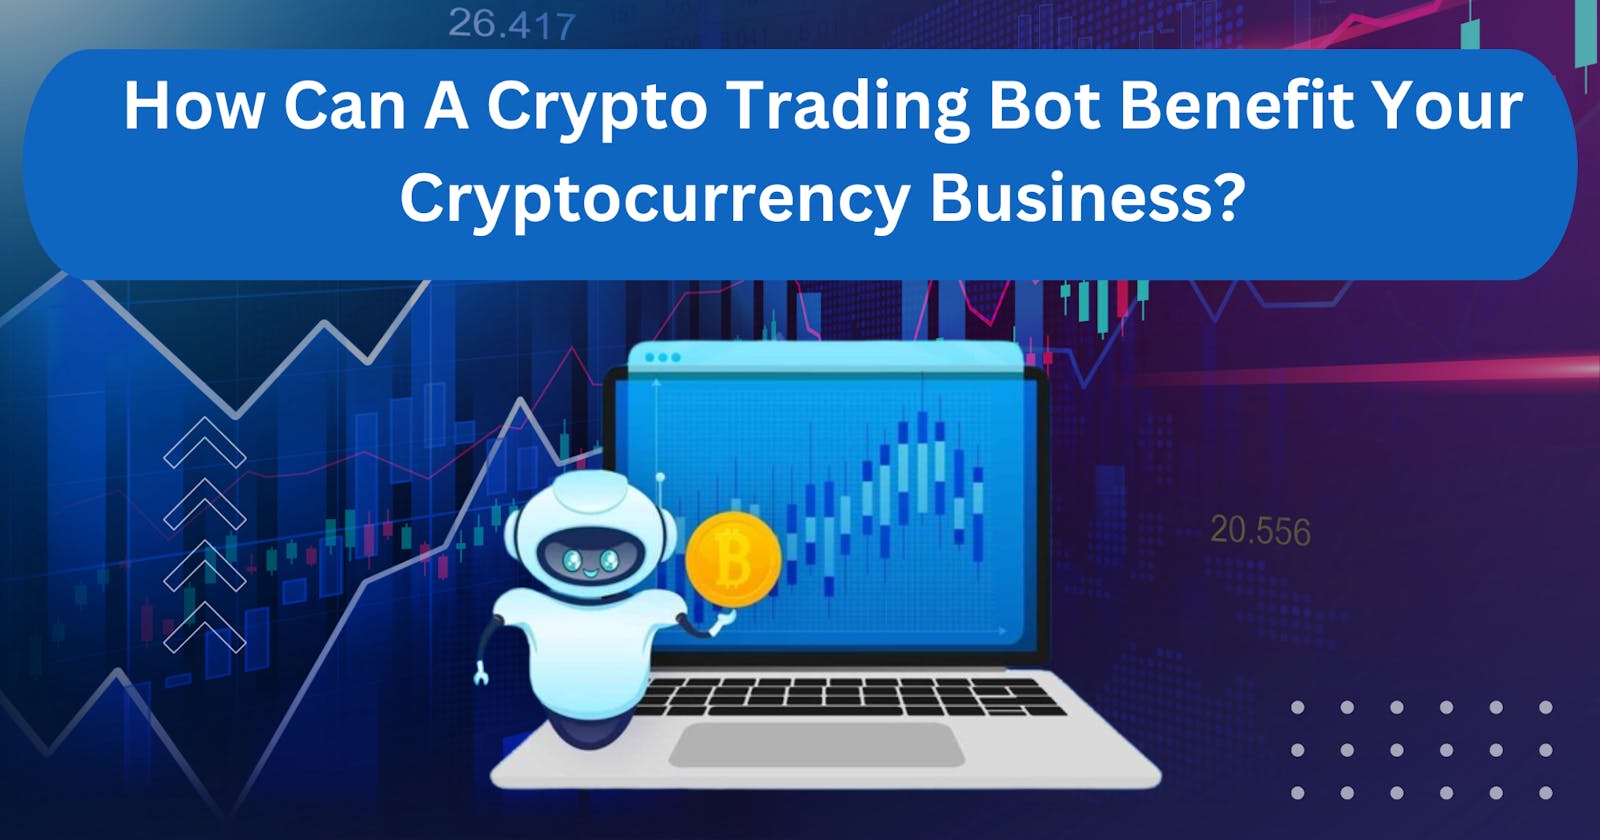 How Can A Crypto Trading Bot Benefit Your Cryptocurrency Business?